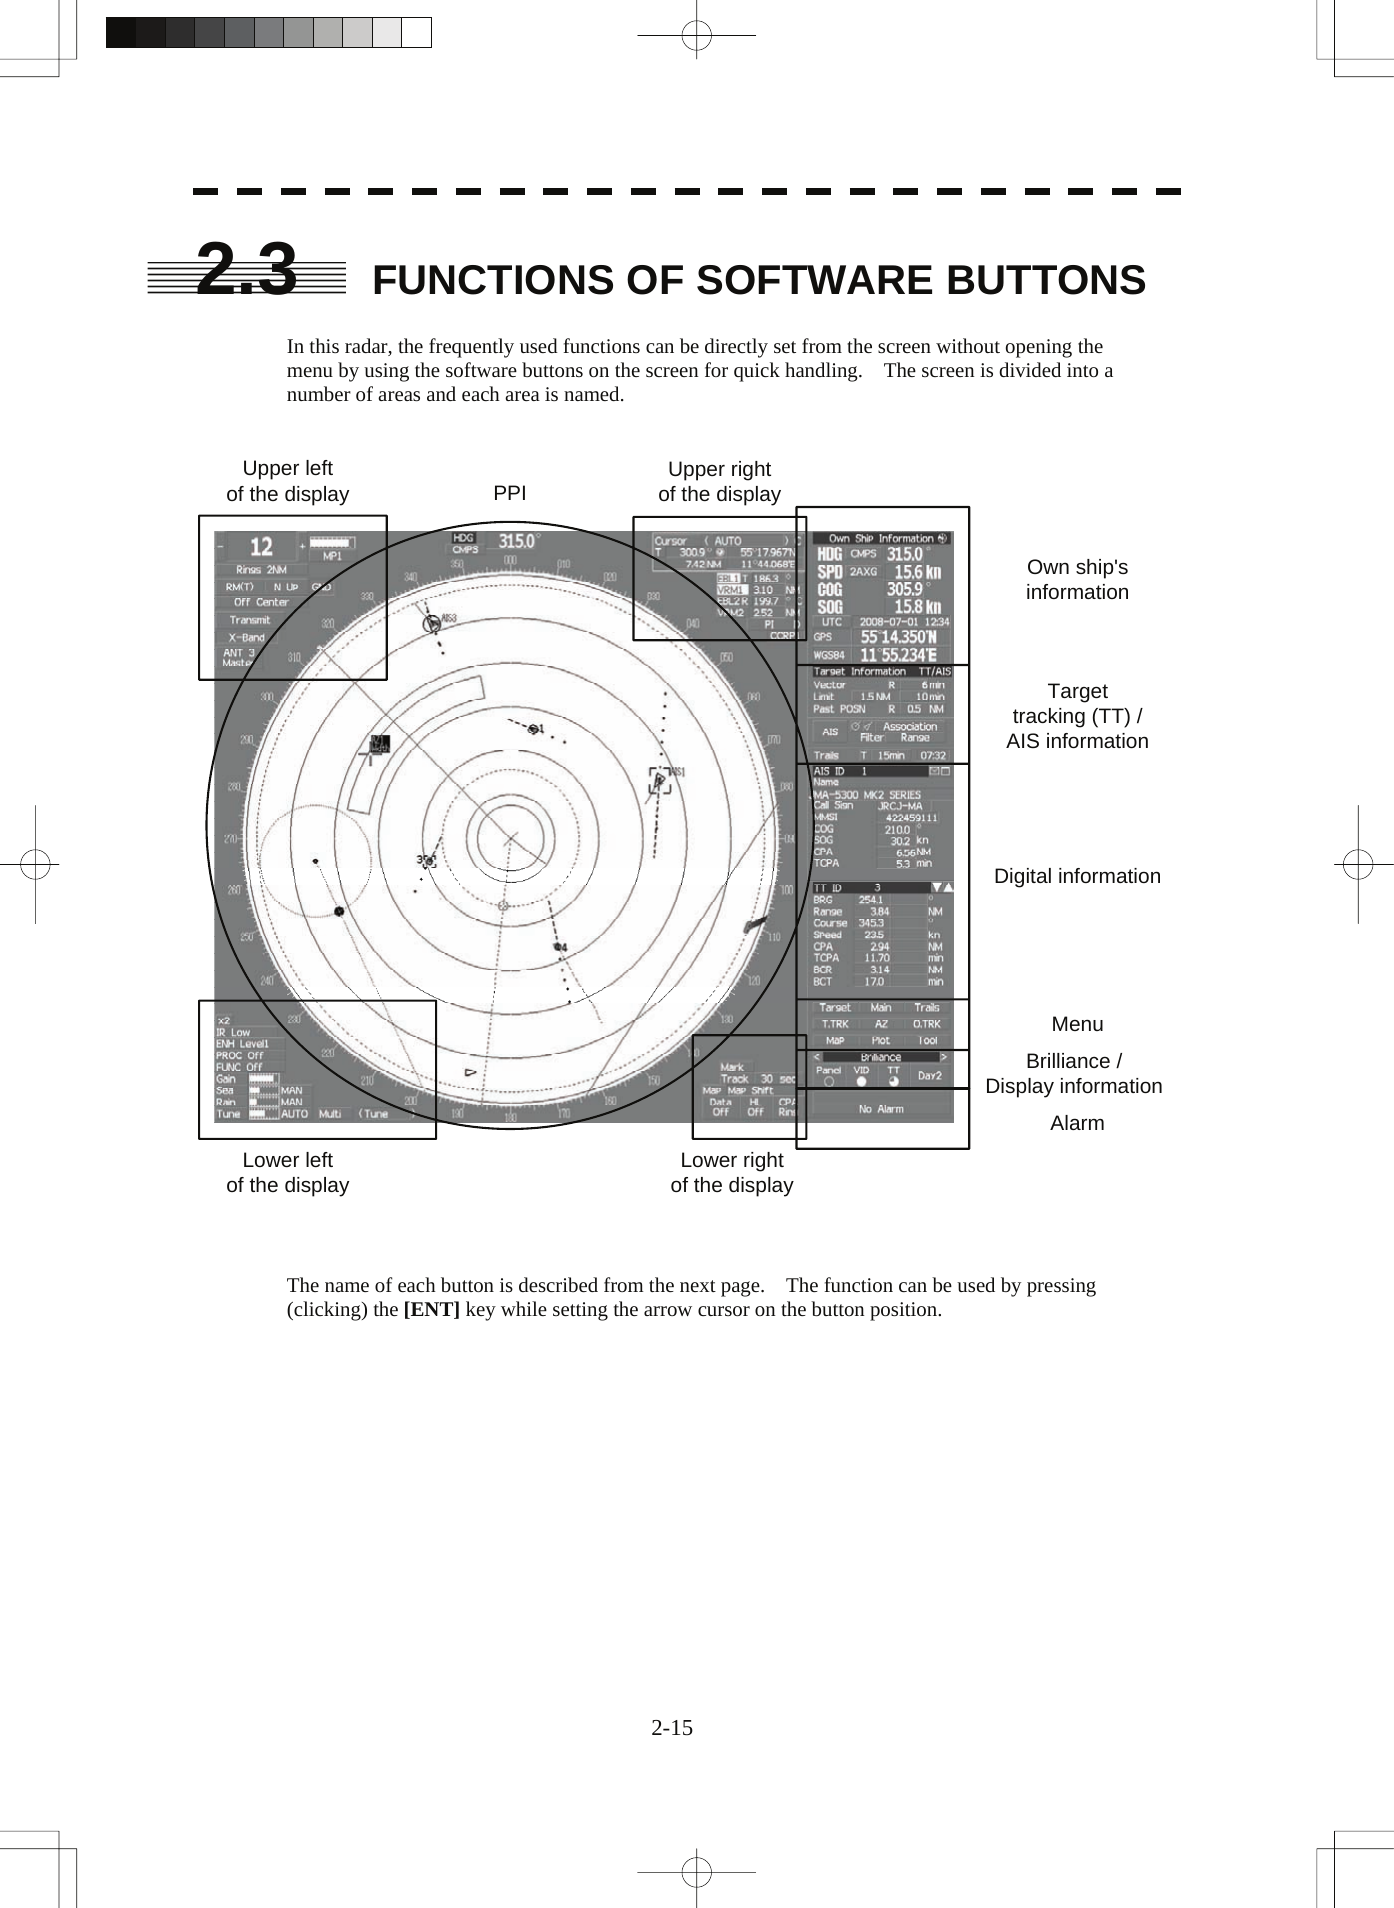  2-15 2.3  FUNCTIONS OF SOFTWARE BUTTONS  In this radar, the frequently used functions can be directly set from the screen without opening the menu by using the software buttons on the screen for quick handling.    The screen is divided into a number of areas and each area is named.   PPIUpper leftof the displayLower leftof the displayUpper rightof the displayLower rightof the displayOwn ship&apos;s informationDigital informationTargettracking (TT) /AIS informationMenuBrilliance /Display informationAlarm   The name of each button is described from the next page.    The function can be used by pressing (clicking) the [ENT] key while setting the arrow cursor on the button position.    